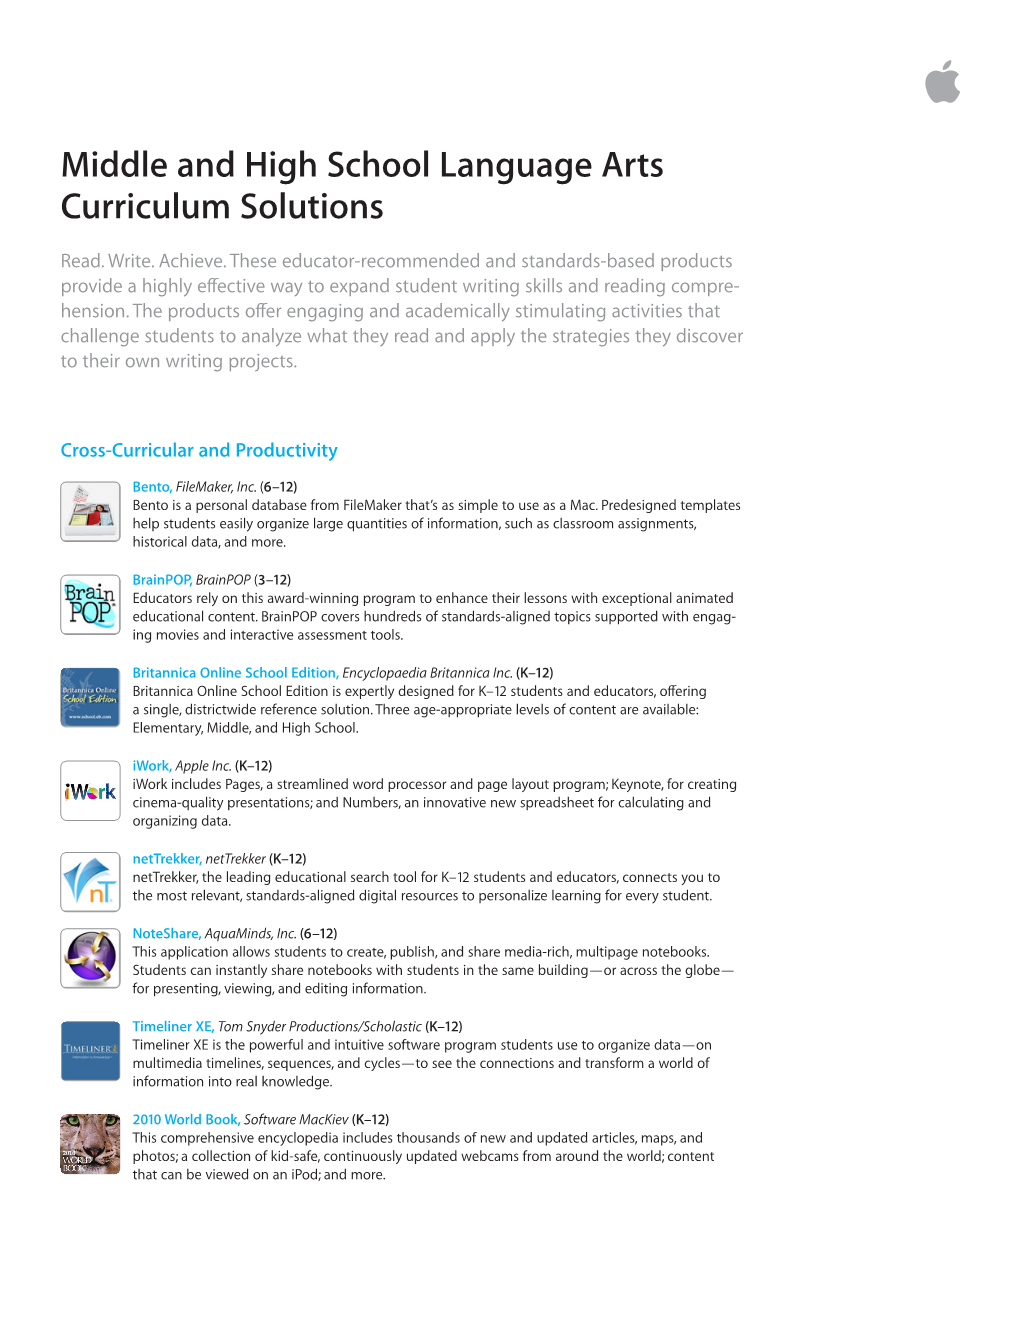 Middle and High School Language Arts Curriculum Solutions